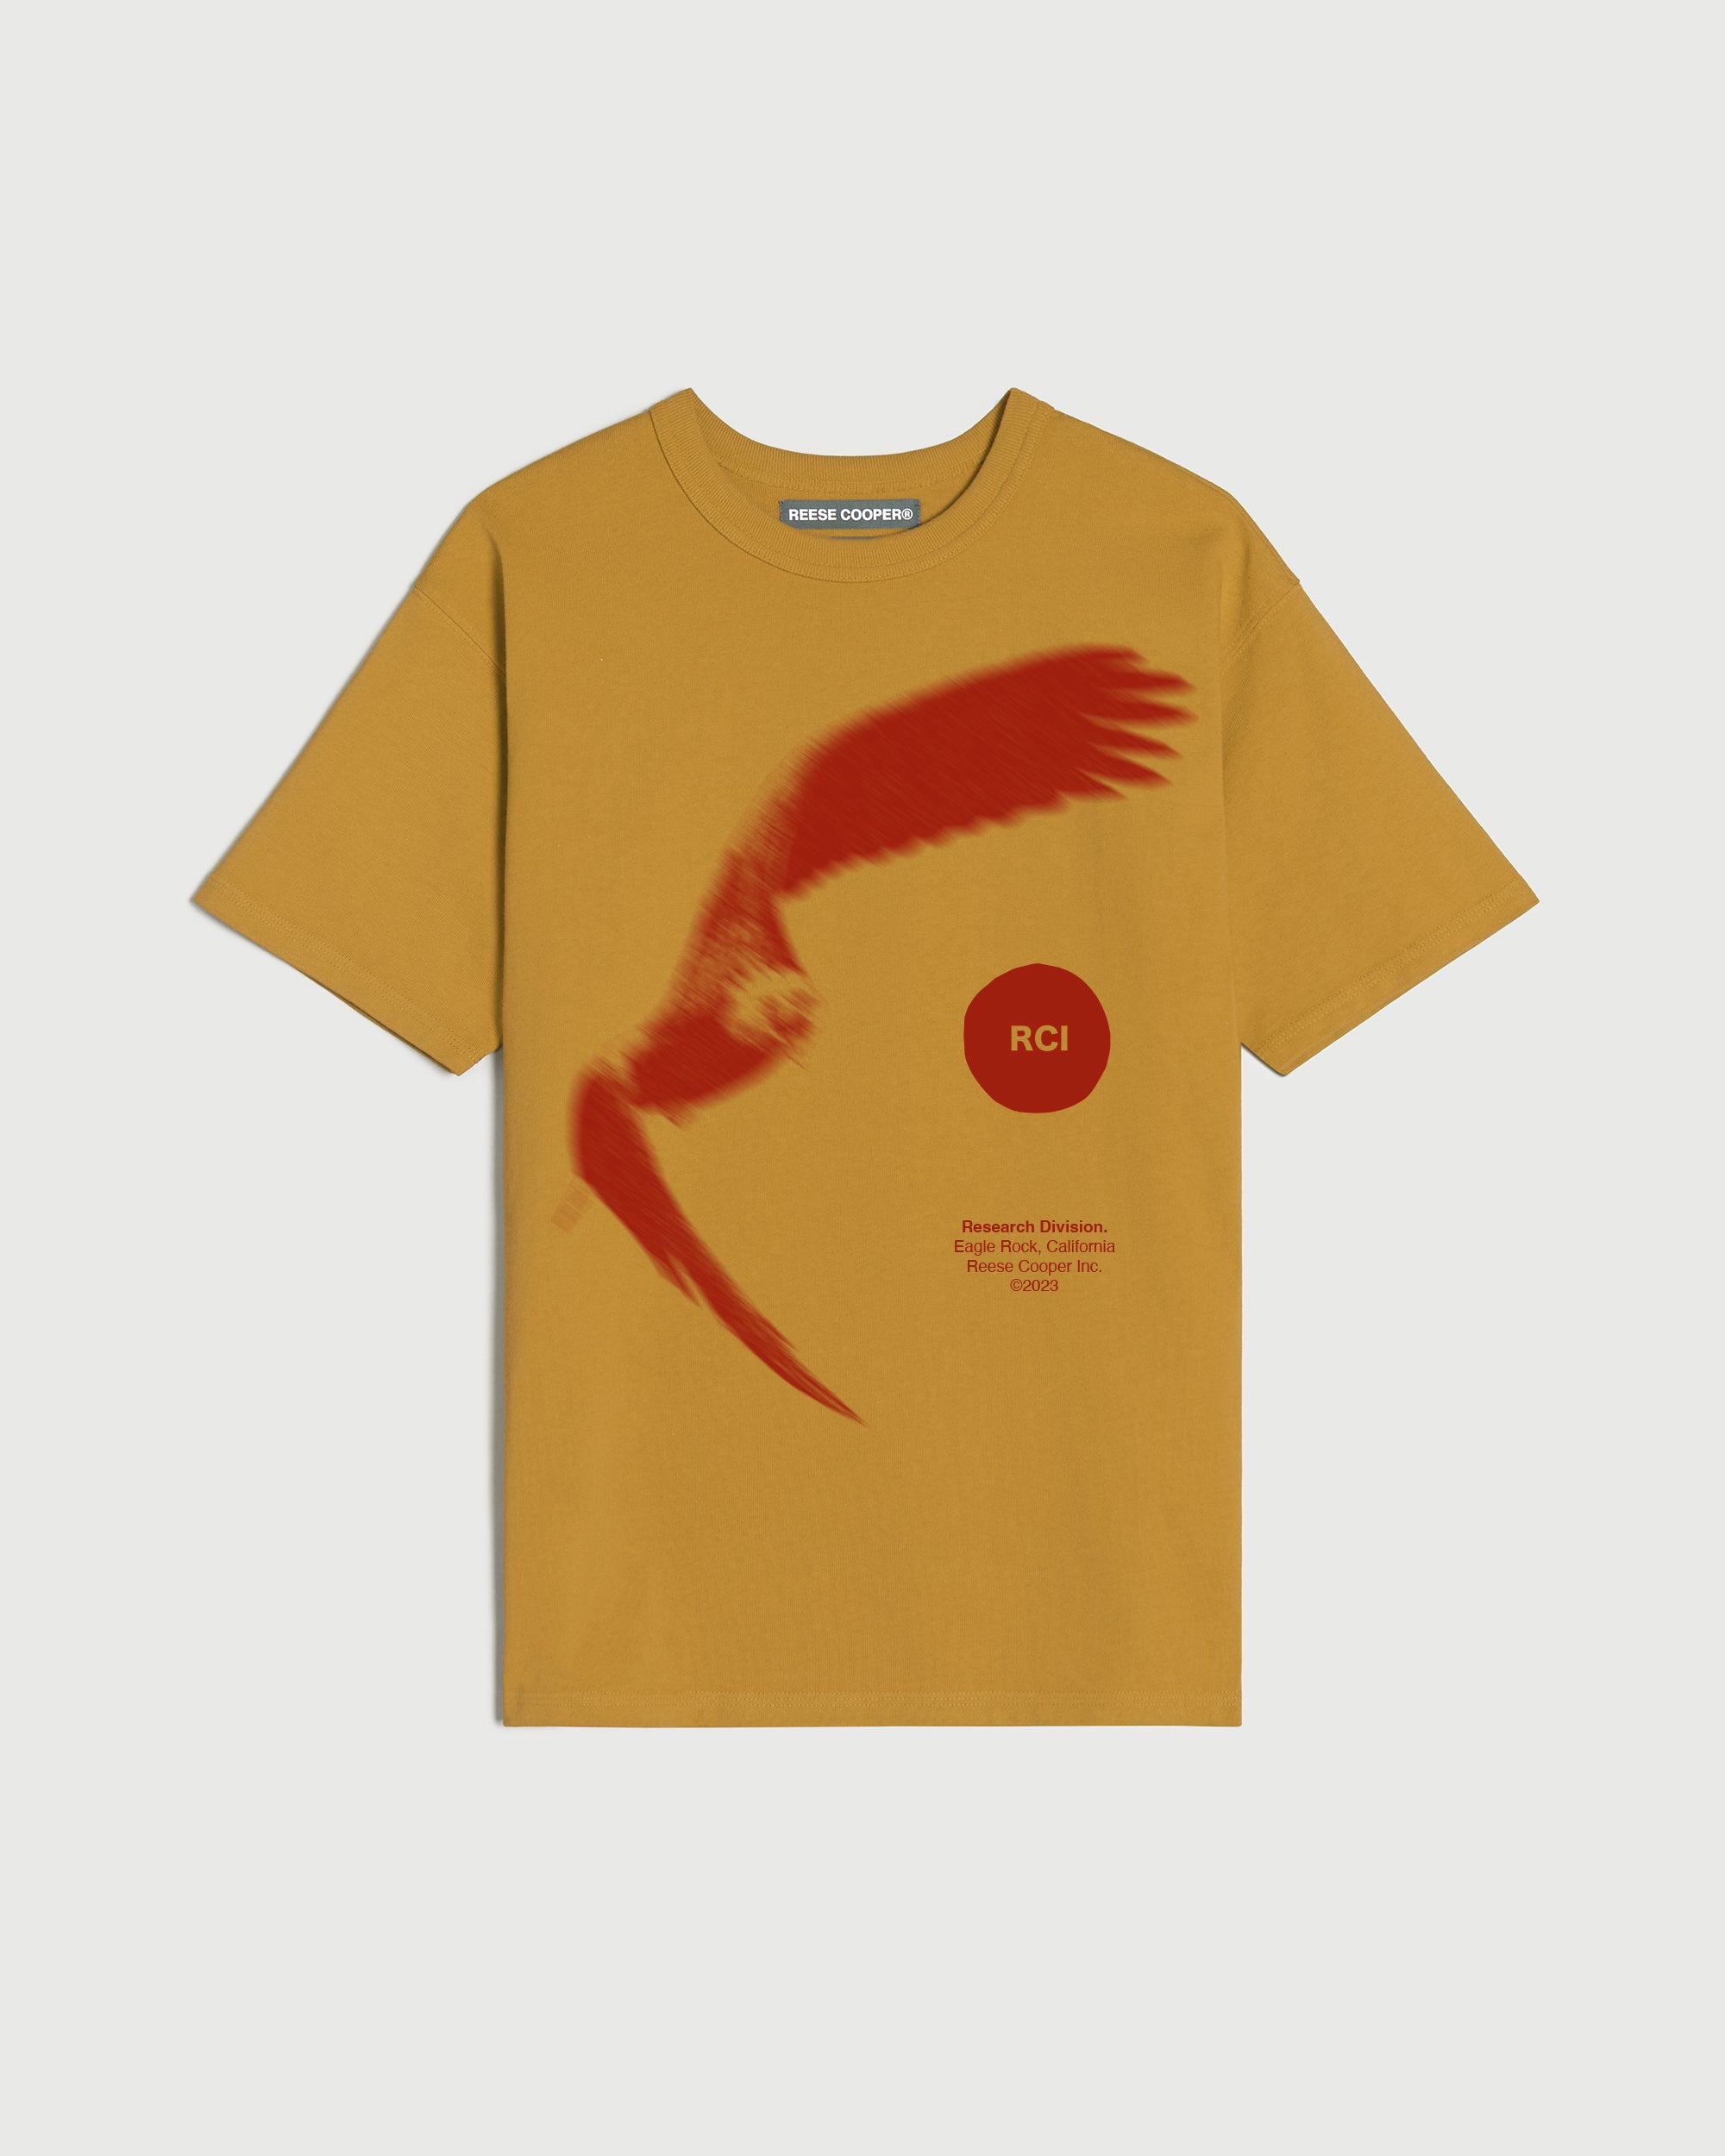 Eagle T-Shirt in Yellow